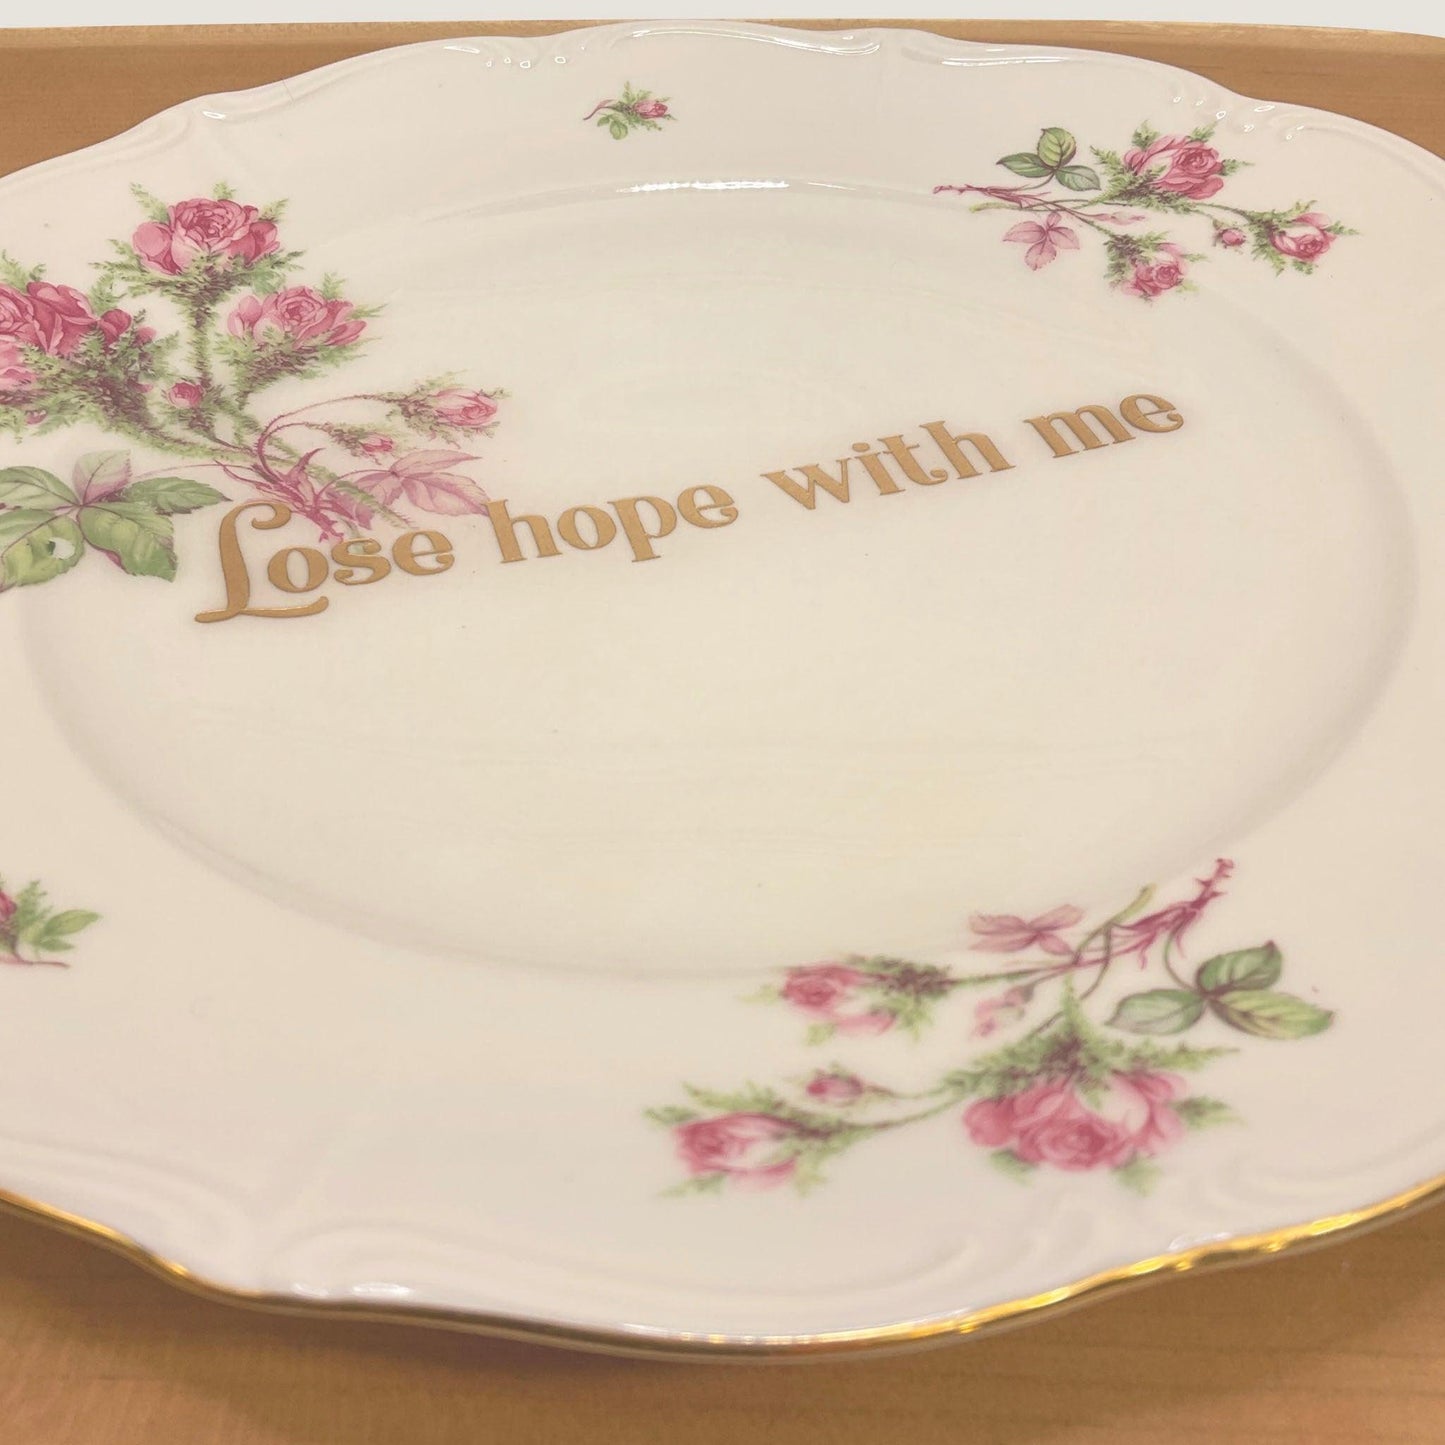 Lose Hope with Me Dinner Plate - Offensively Domestic